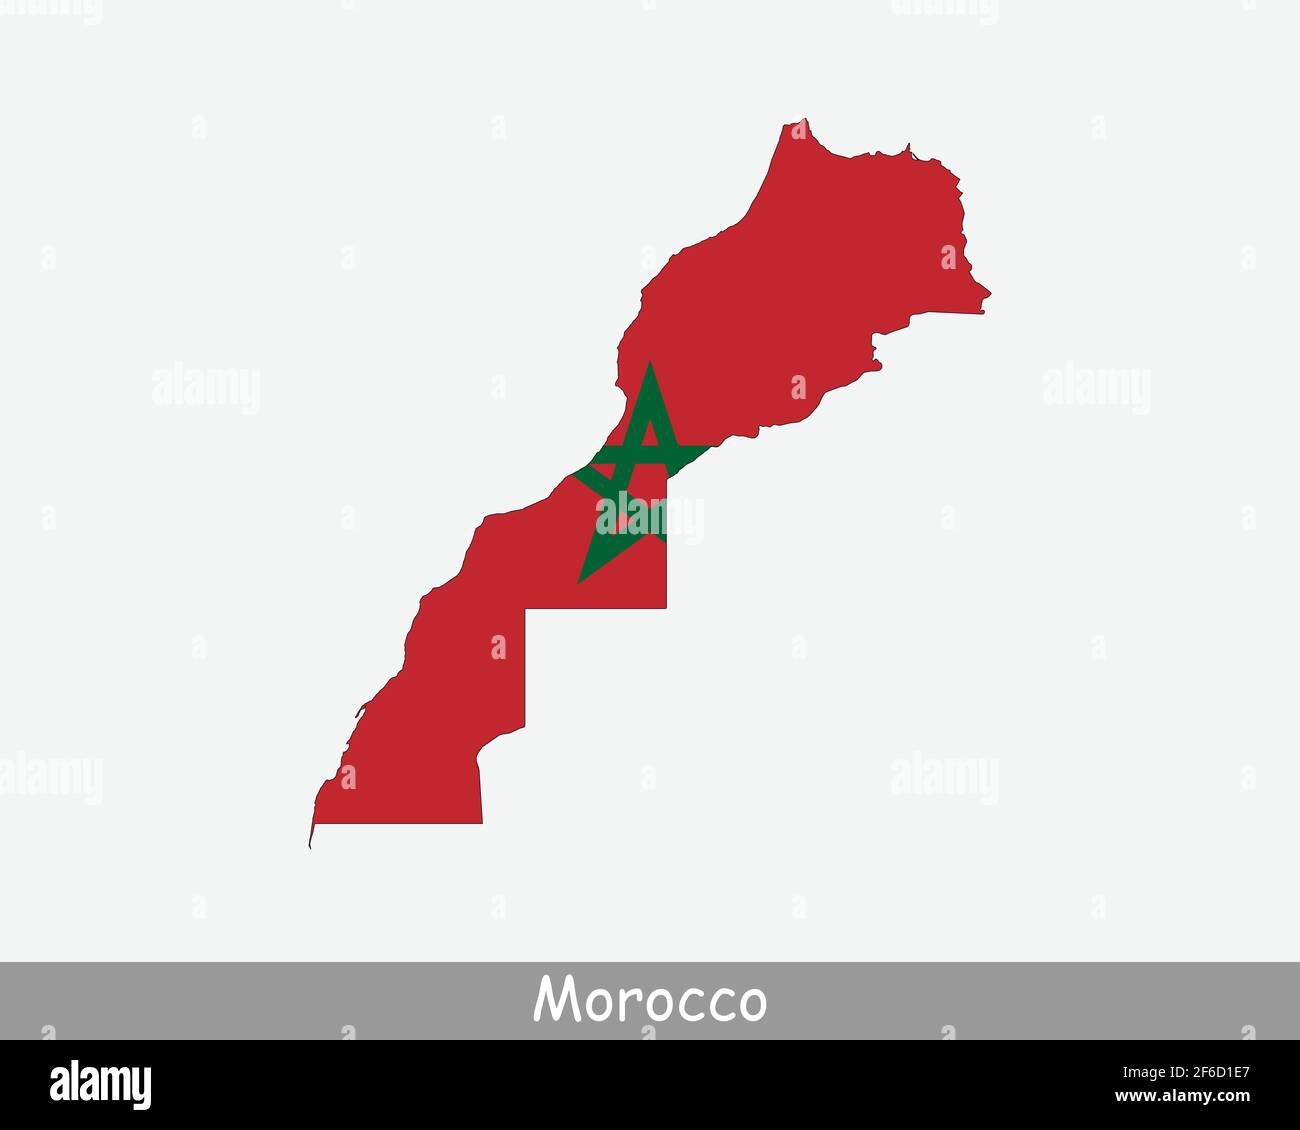 Morocco Flag Map. Map of the Kingdom of Morocco with the Moroccan national flag isolated on white background. Vector Illustration. Stock Vector